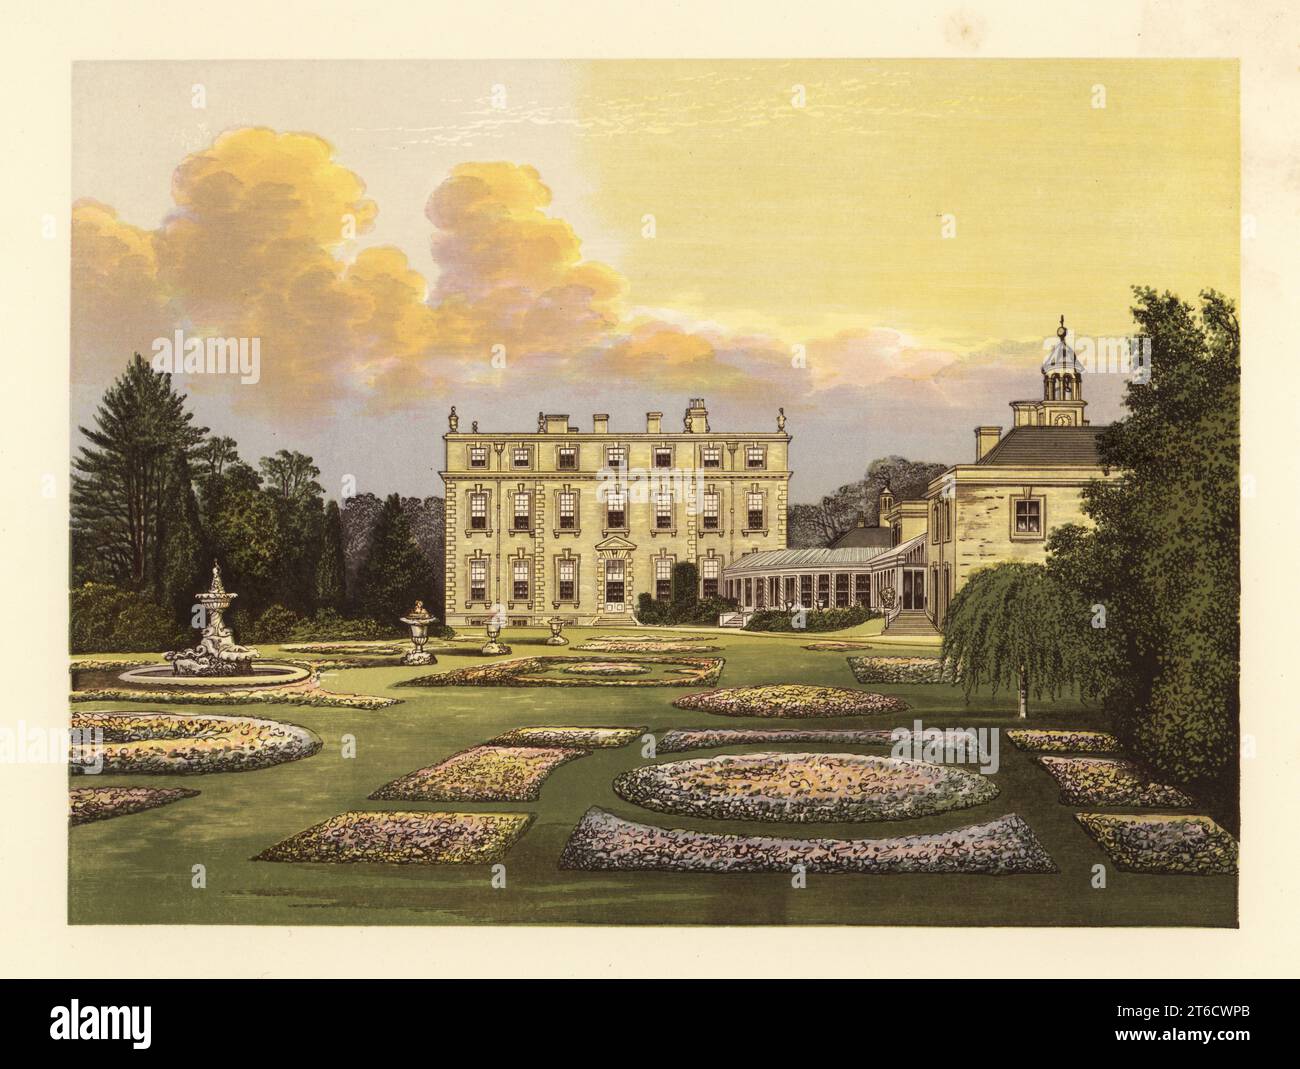 Ditchley House and gardens, Oxfordshire, England. Fine oak and stone house designed by architect James Gibb in 1722 for George Henry Lee I, 2nd Earl of Lichfield. Home of Arthur Edmund Denis Dillon, 16th Viscount Dillon. Colour woodblock by Benjamin Fawcett in the Baxter process of an illustration by Alexander Francis Lydon from Reverend Francis Orpen Morriss A Series of Picturesque Views of the Seats of Noblemen and Gentlemen of Great Britain and Ireland, William Mackenzie, London, 1880. Stock Photo